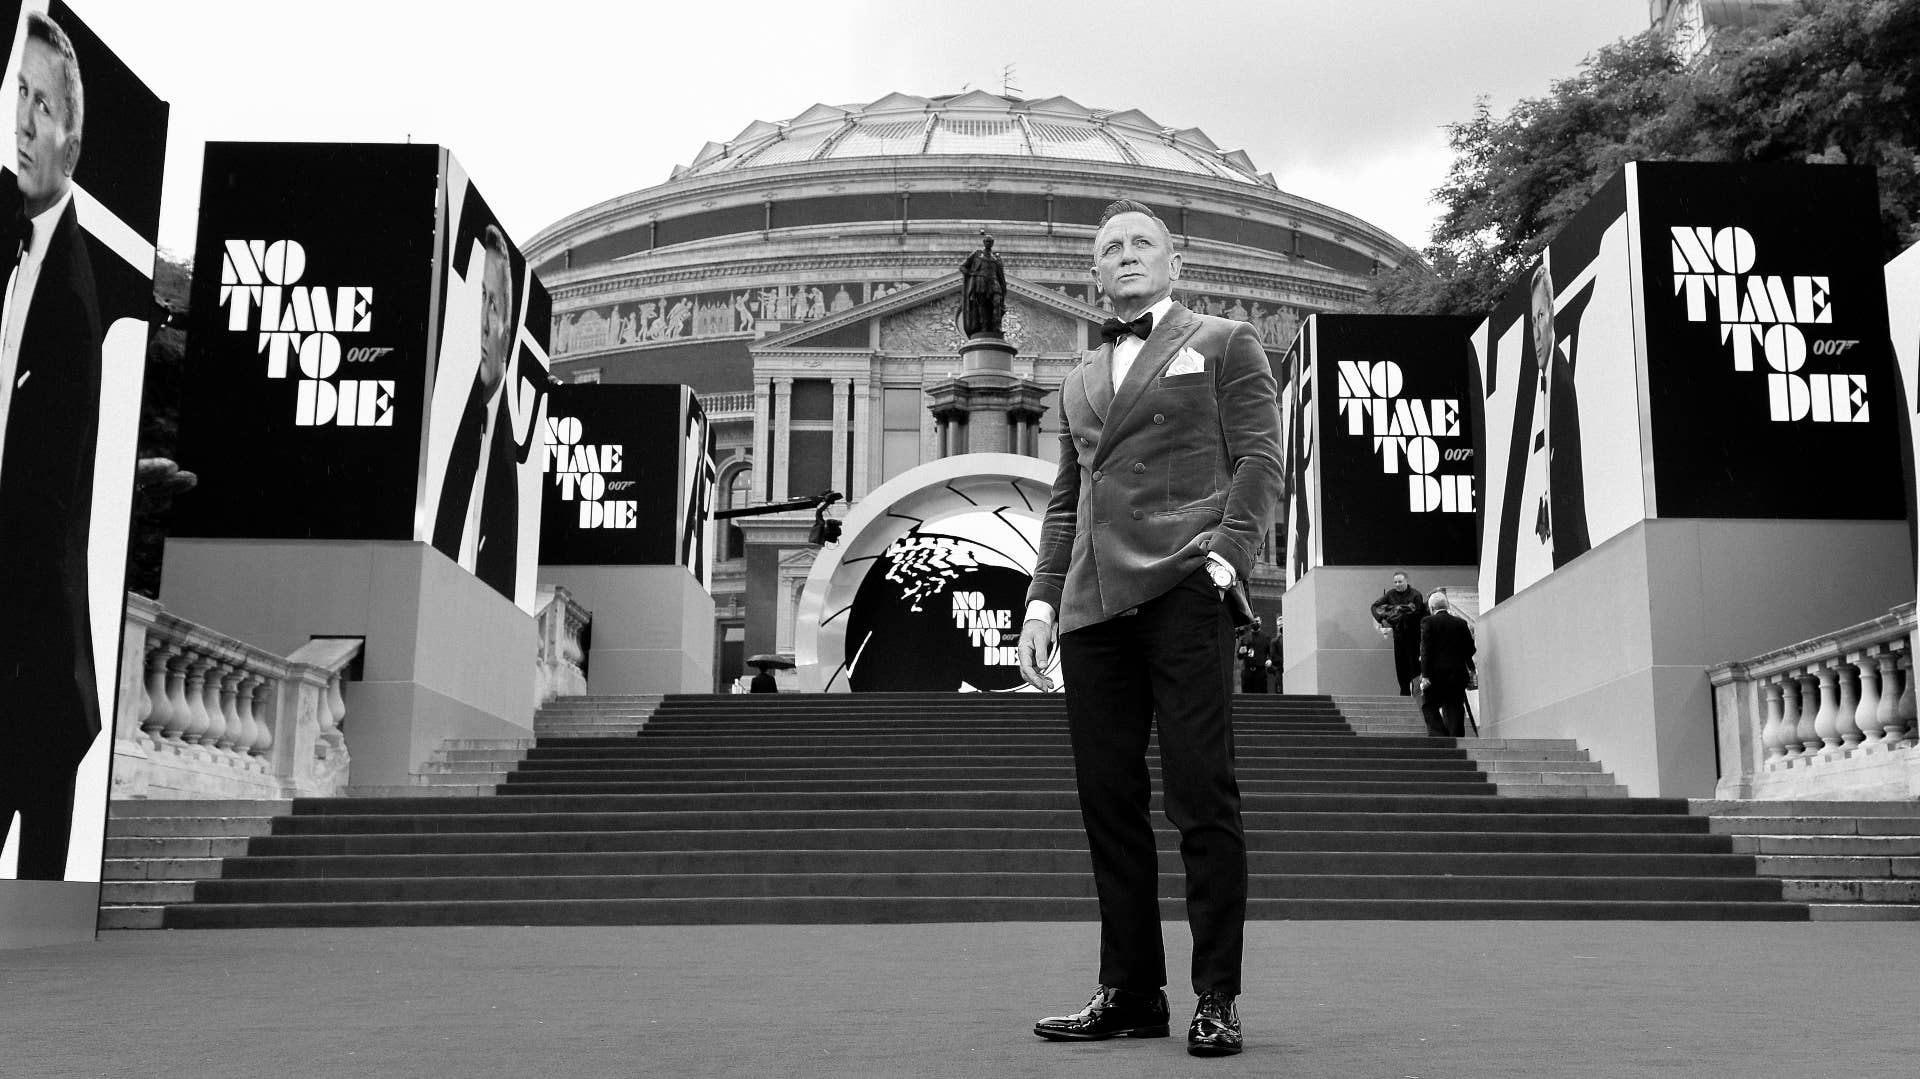 Daniel Craig poses for photo while on red carpet of 'No Time to Die' world premiere.